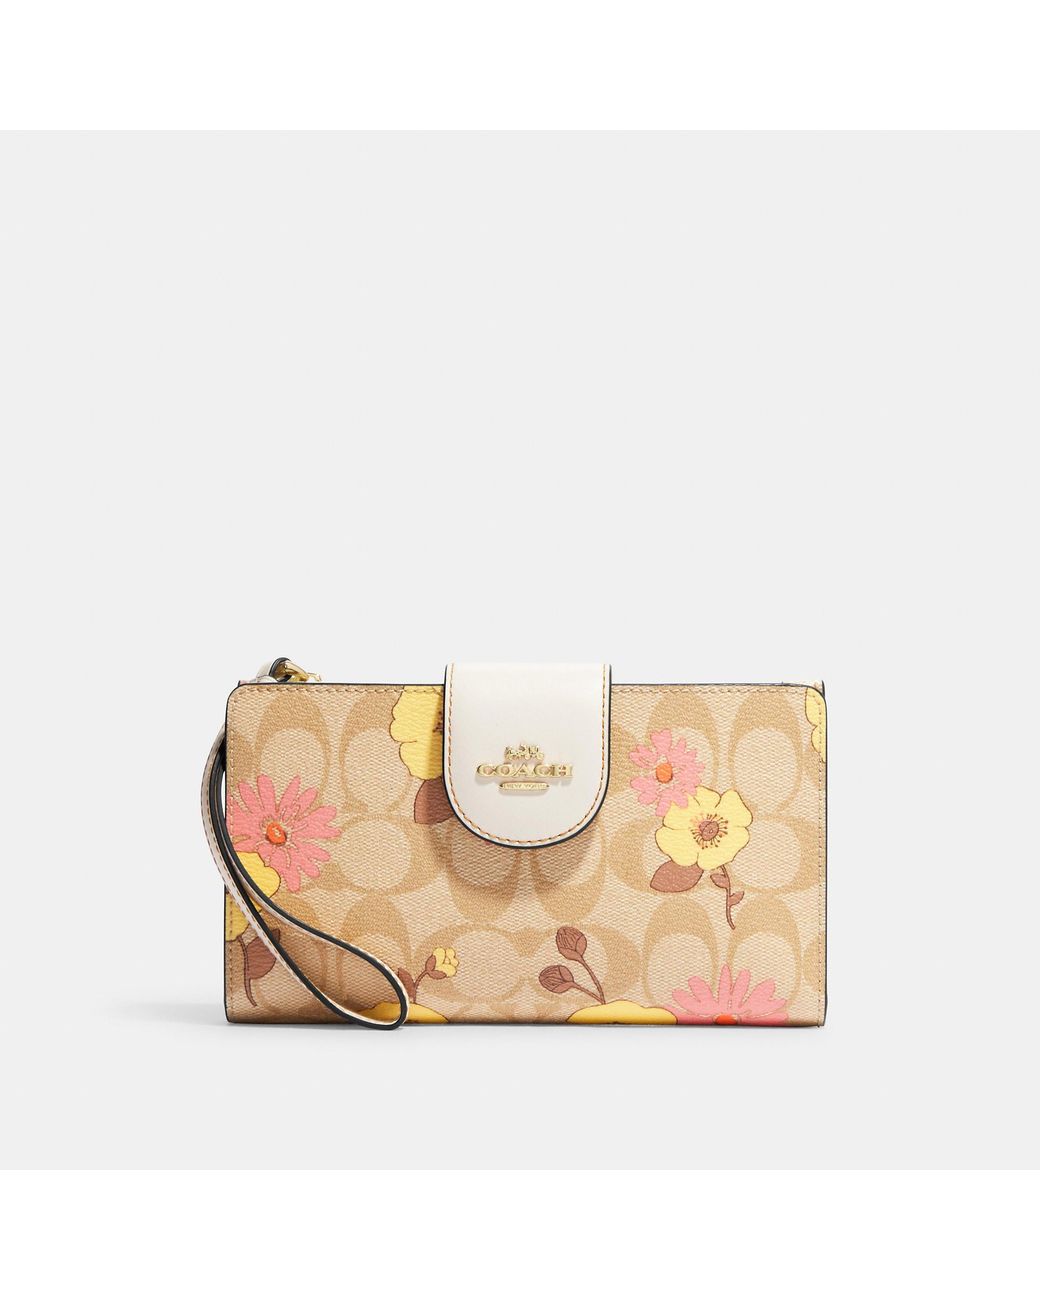 Coach Outlet Phone Wallet in Signature Canvas with Nostalgic Ditsy Print - Multi